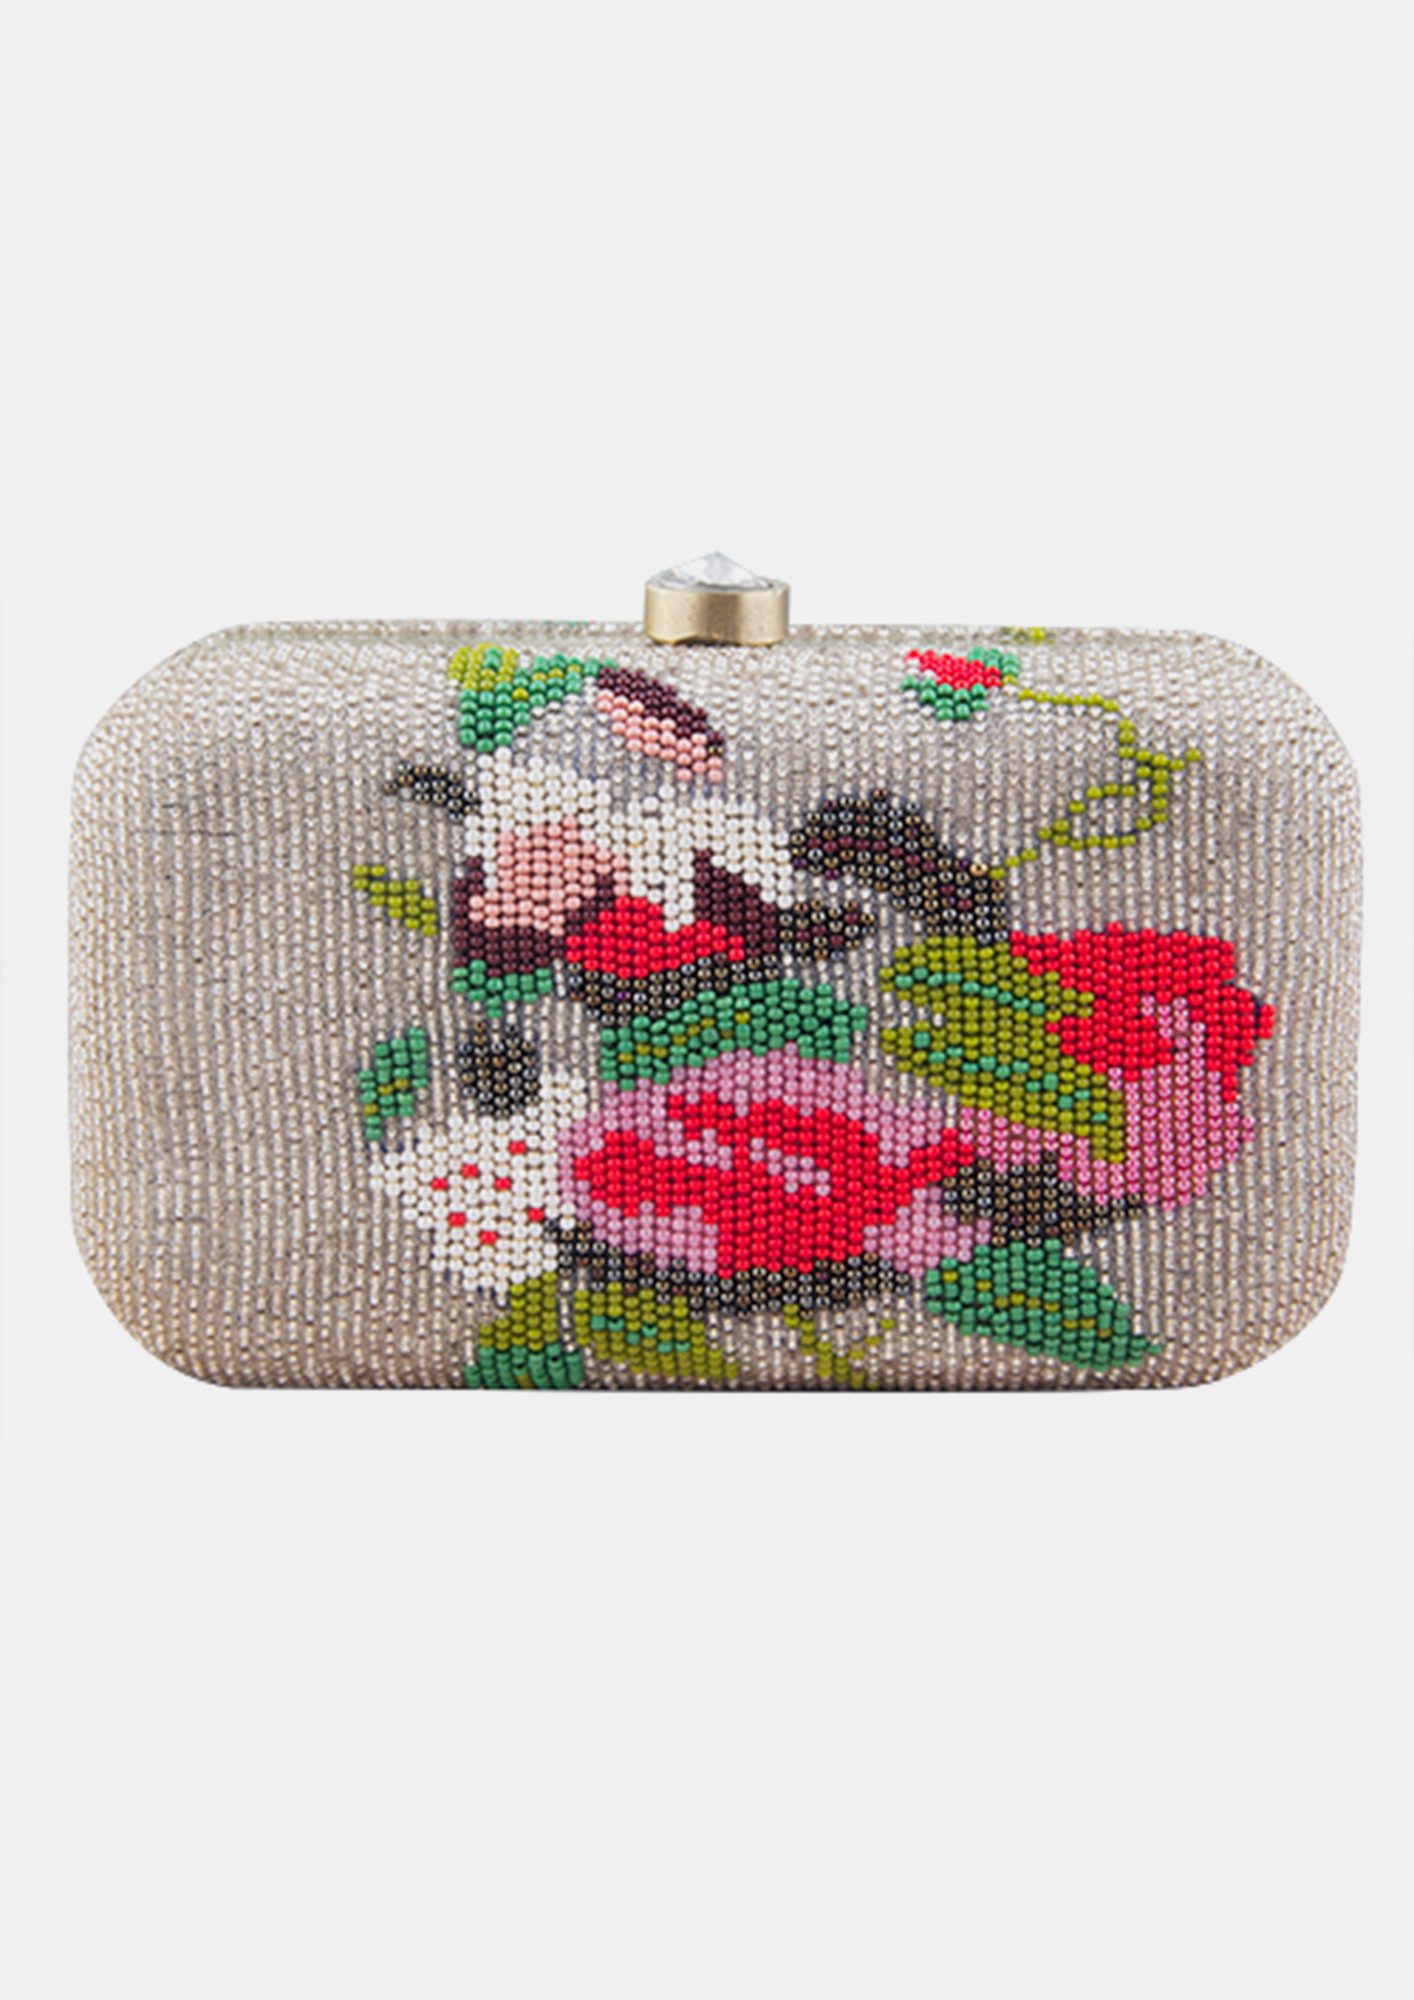 Beads Bags Clutches - Buy Beads Bags Clutches online in India